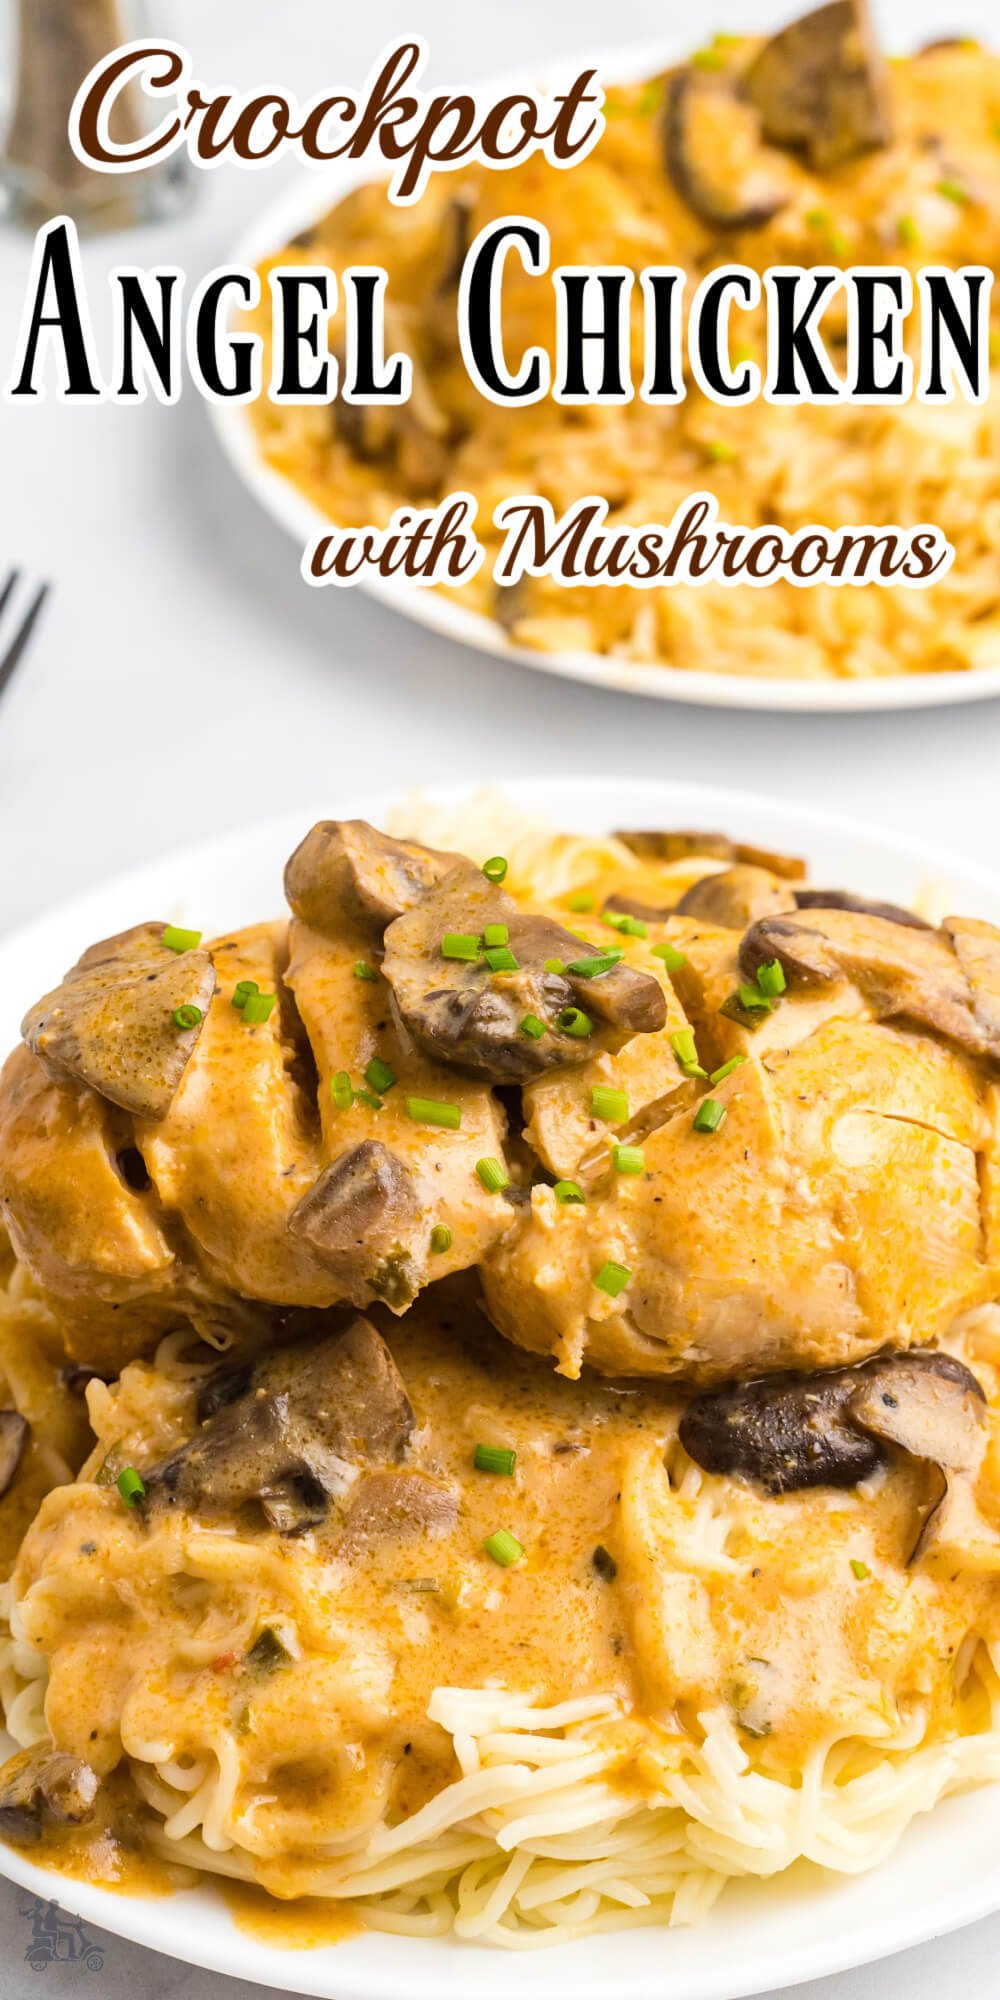 This Crockpot Angel Chicken with Mushrooms is the perfect dish for a busy weeknight! The chicken is tender and buttery and the mushroom sauce is packed with flavor. Another plus is that it takes only a few minutes to prep and is perfect for a weeknight dinner. I guarantee your family will love it!